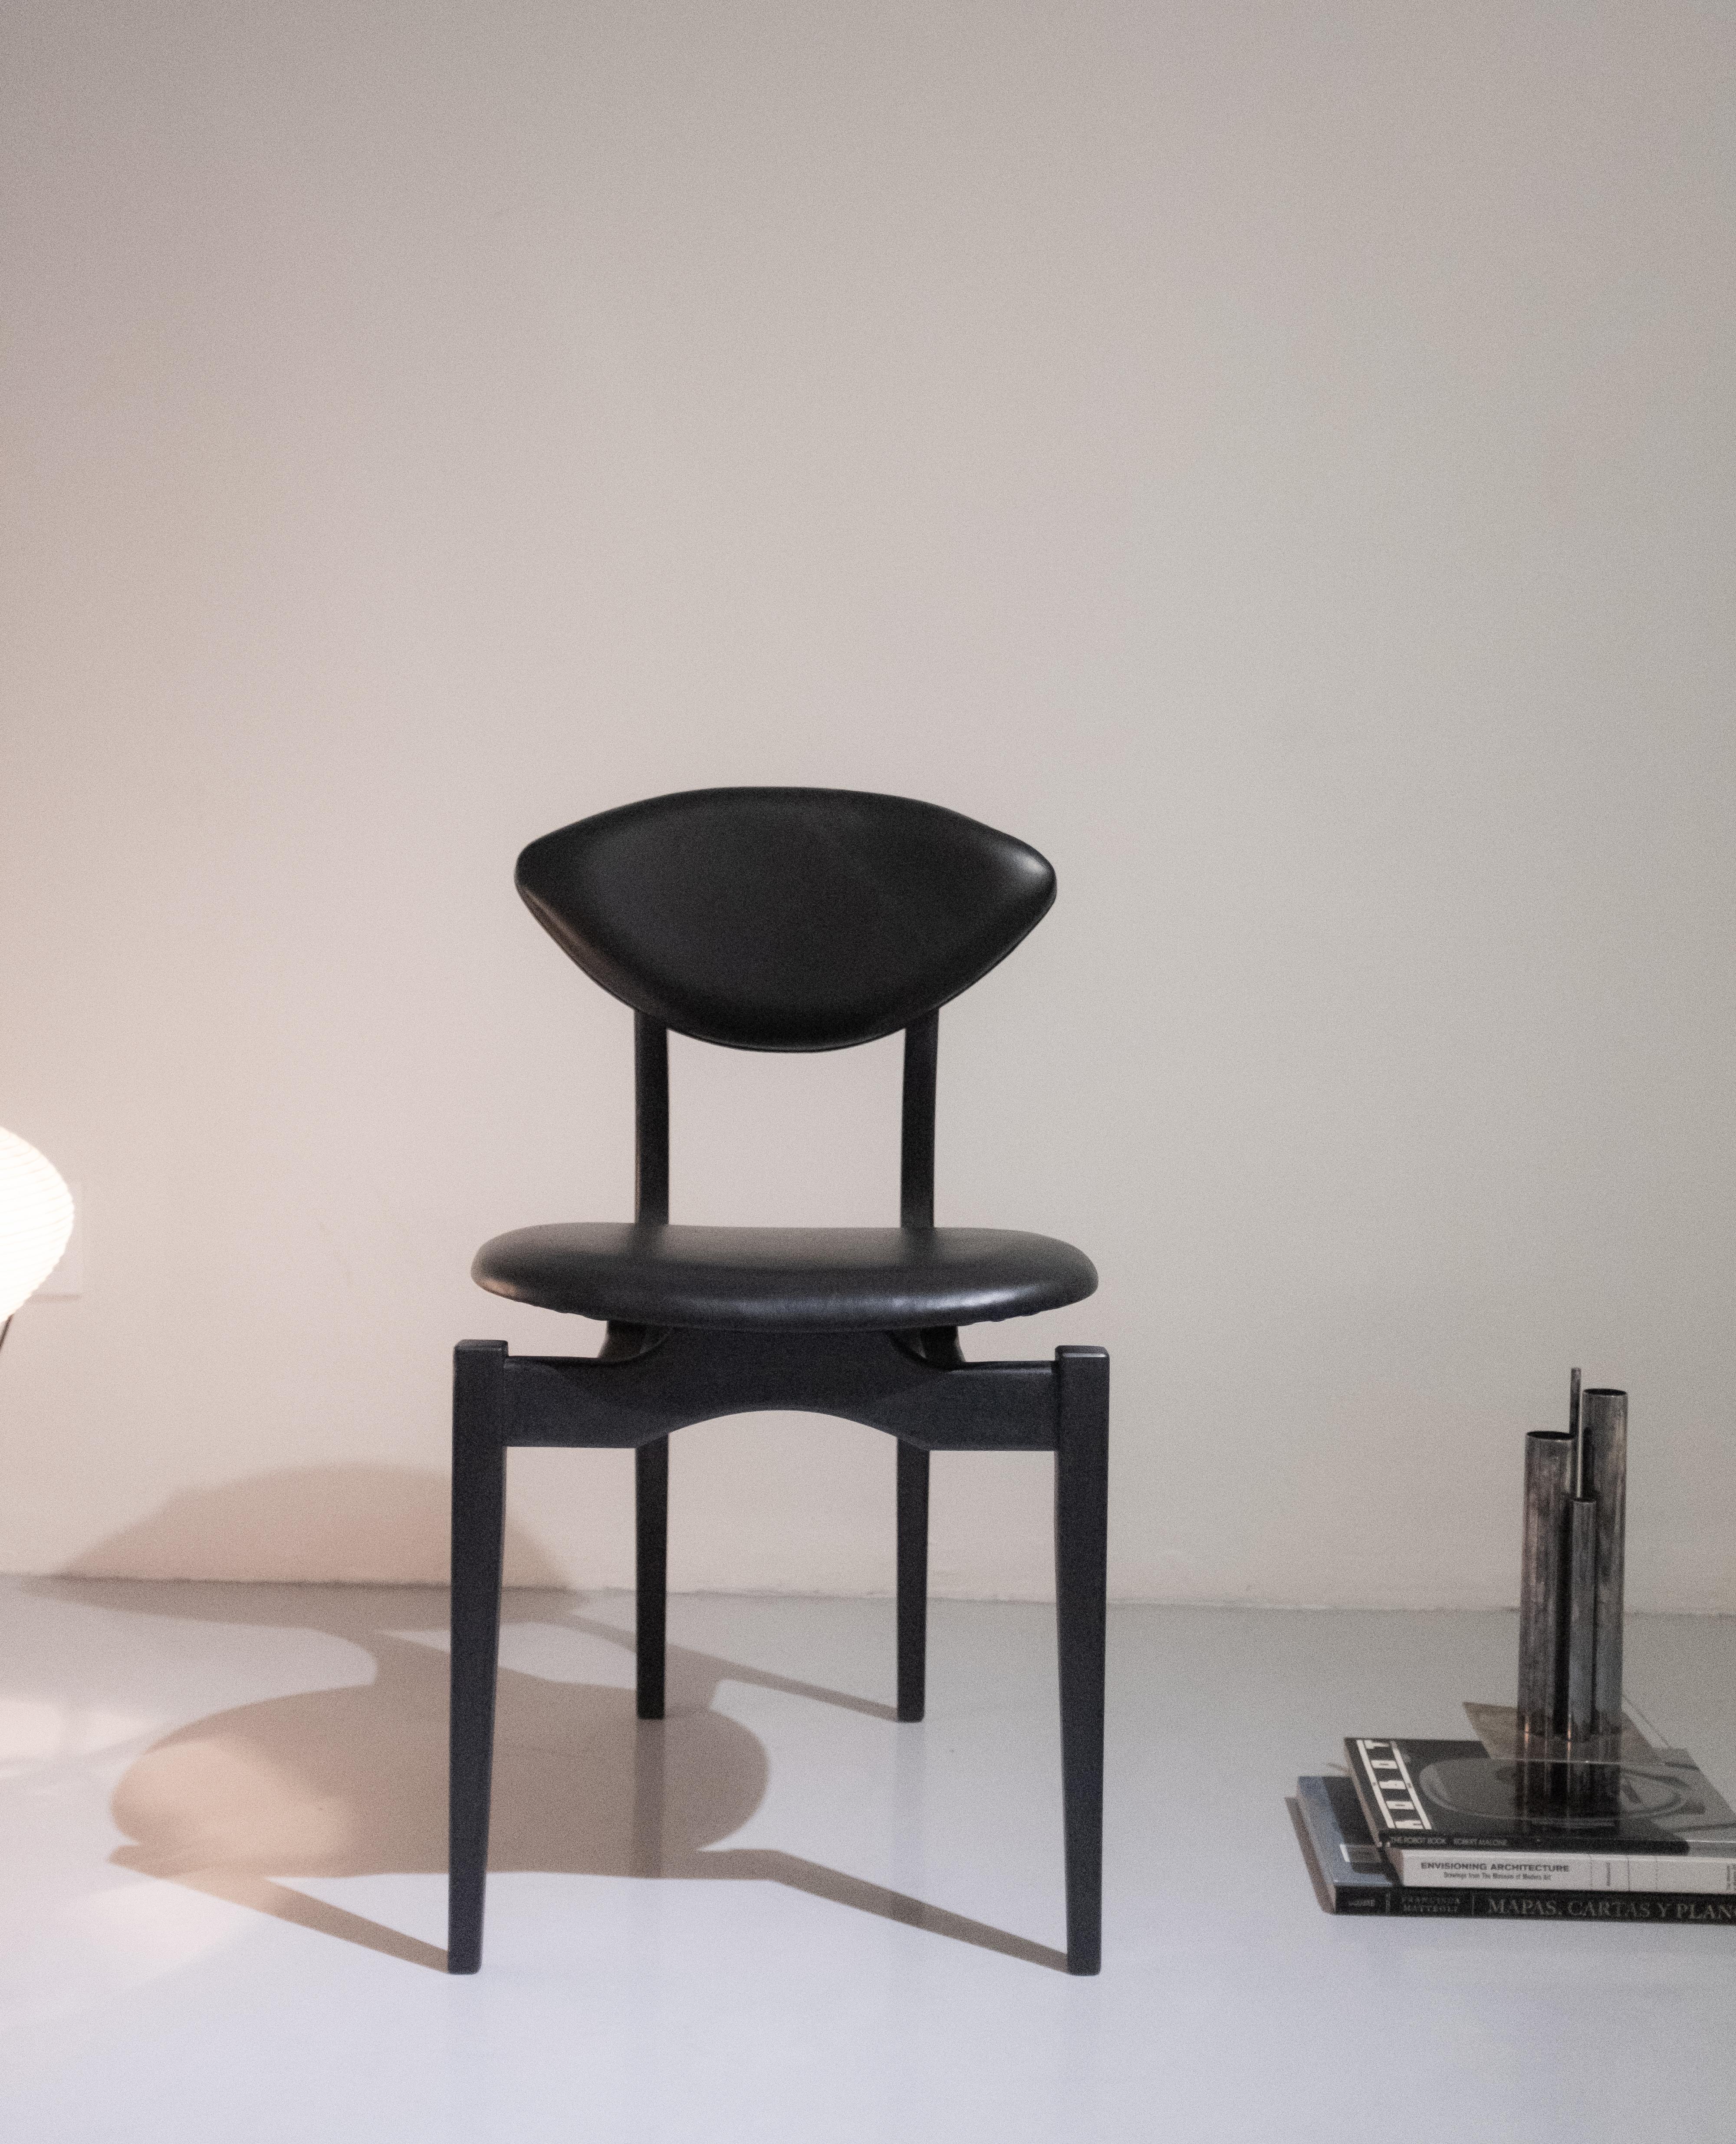 Black Femur dining chair by Atra Design
Dimensions: D 58.5 x W 45 x H 85 cm
Materials: leather, walnut
Available in leather or fabric seat and in other colors.

Atra Design
We are Atra, a furniture brand produced by Atra form a mexico